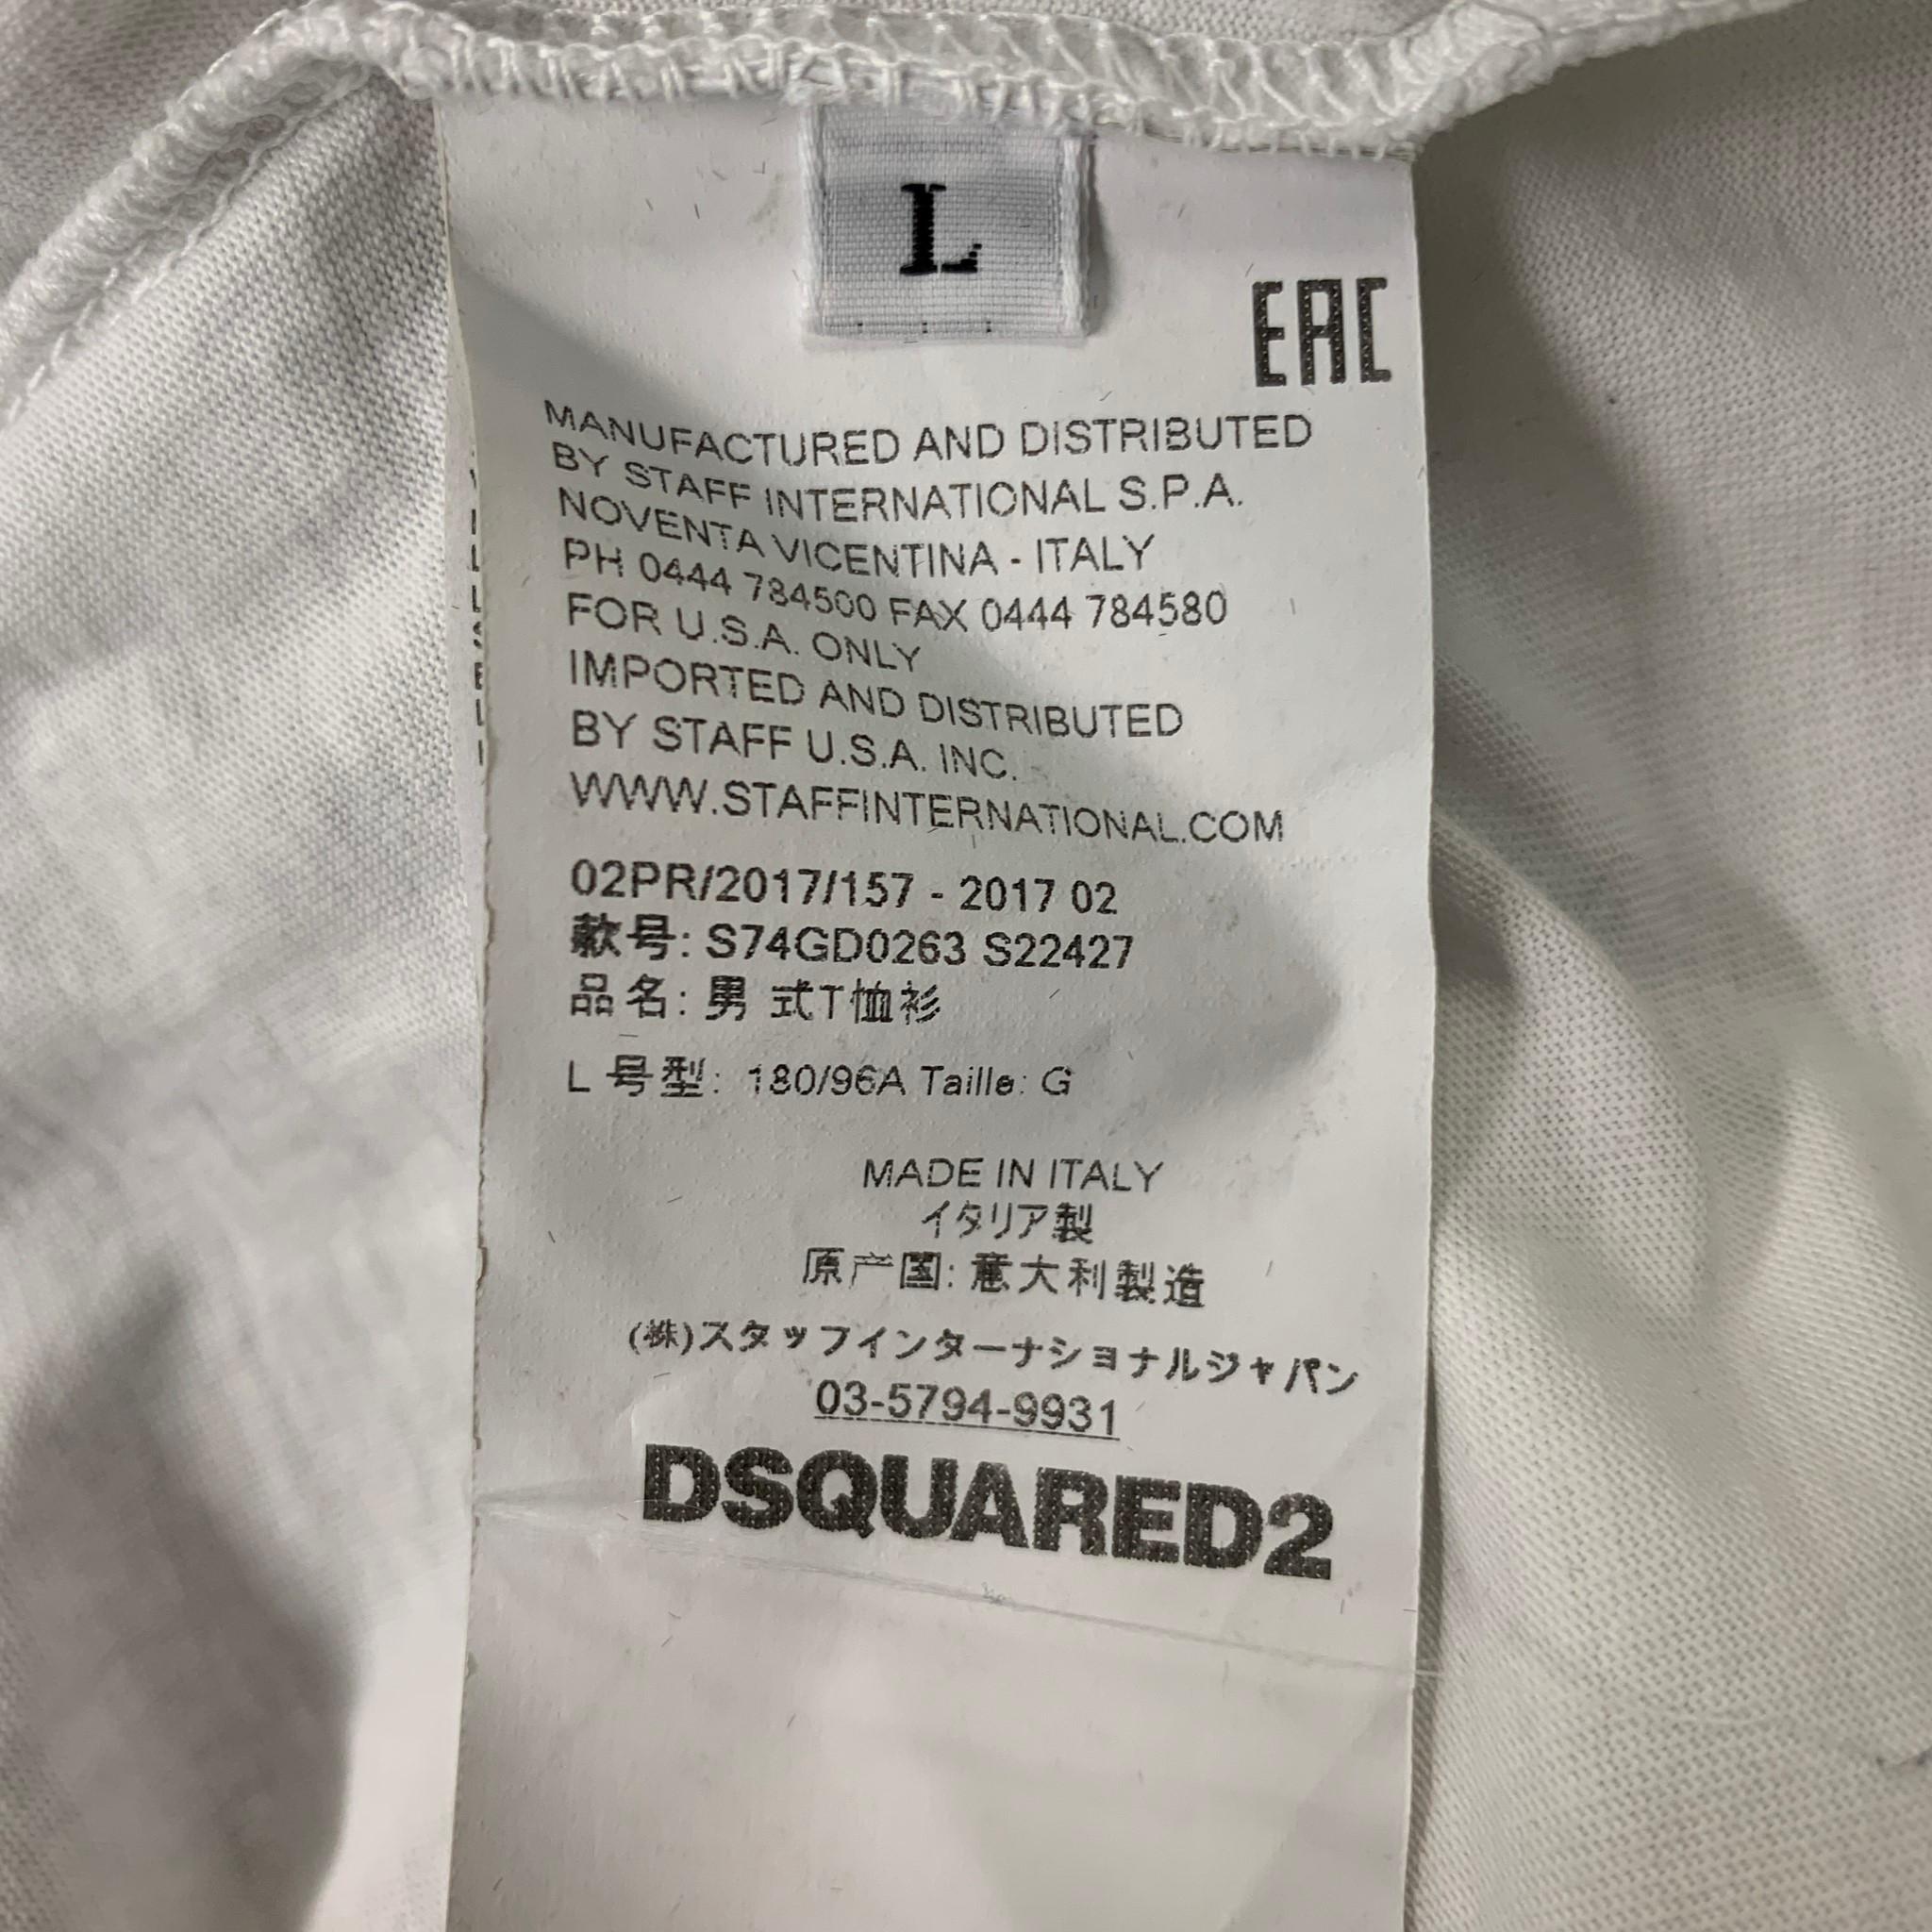 is dsquared made in romania